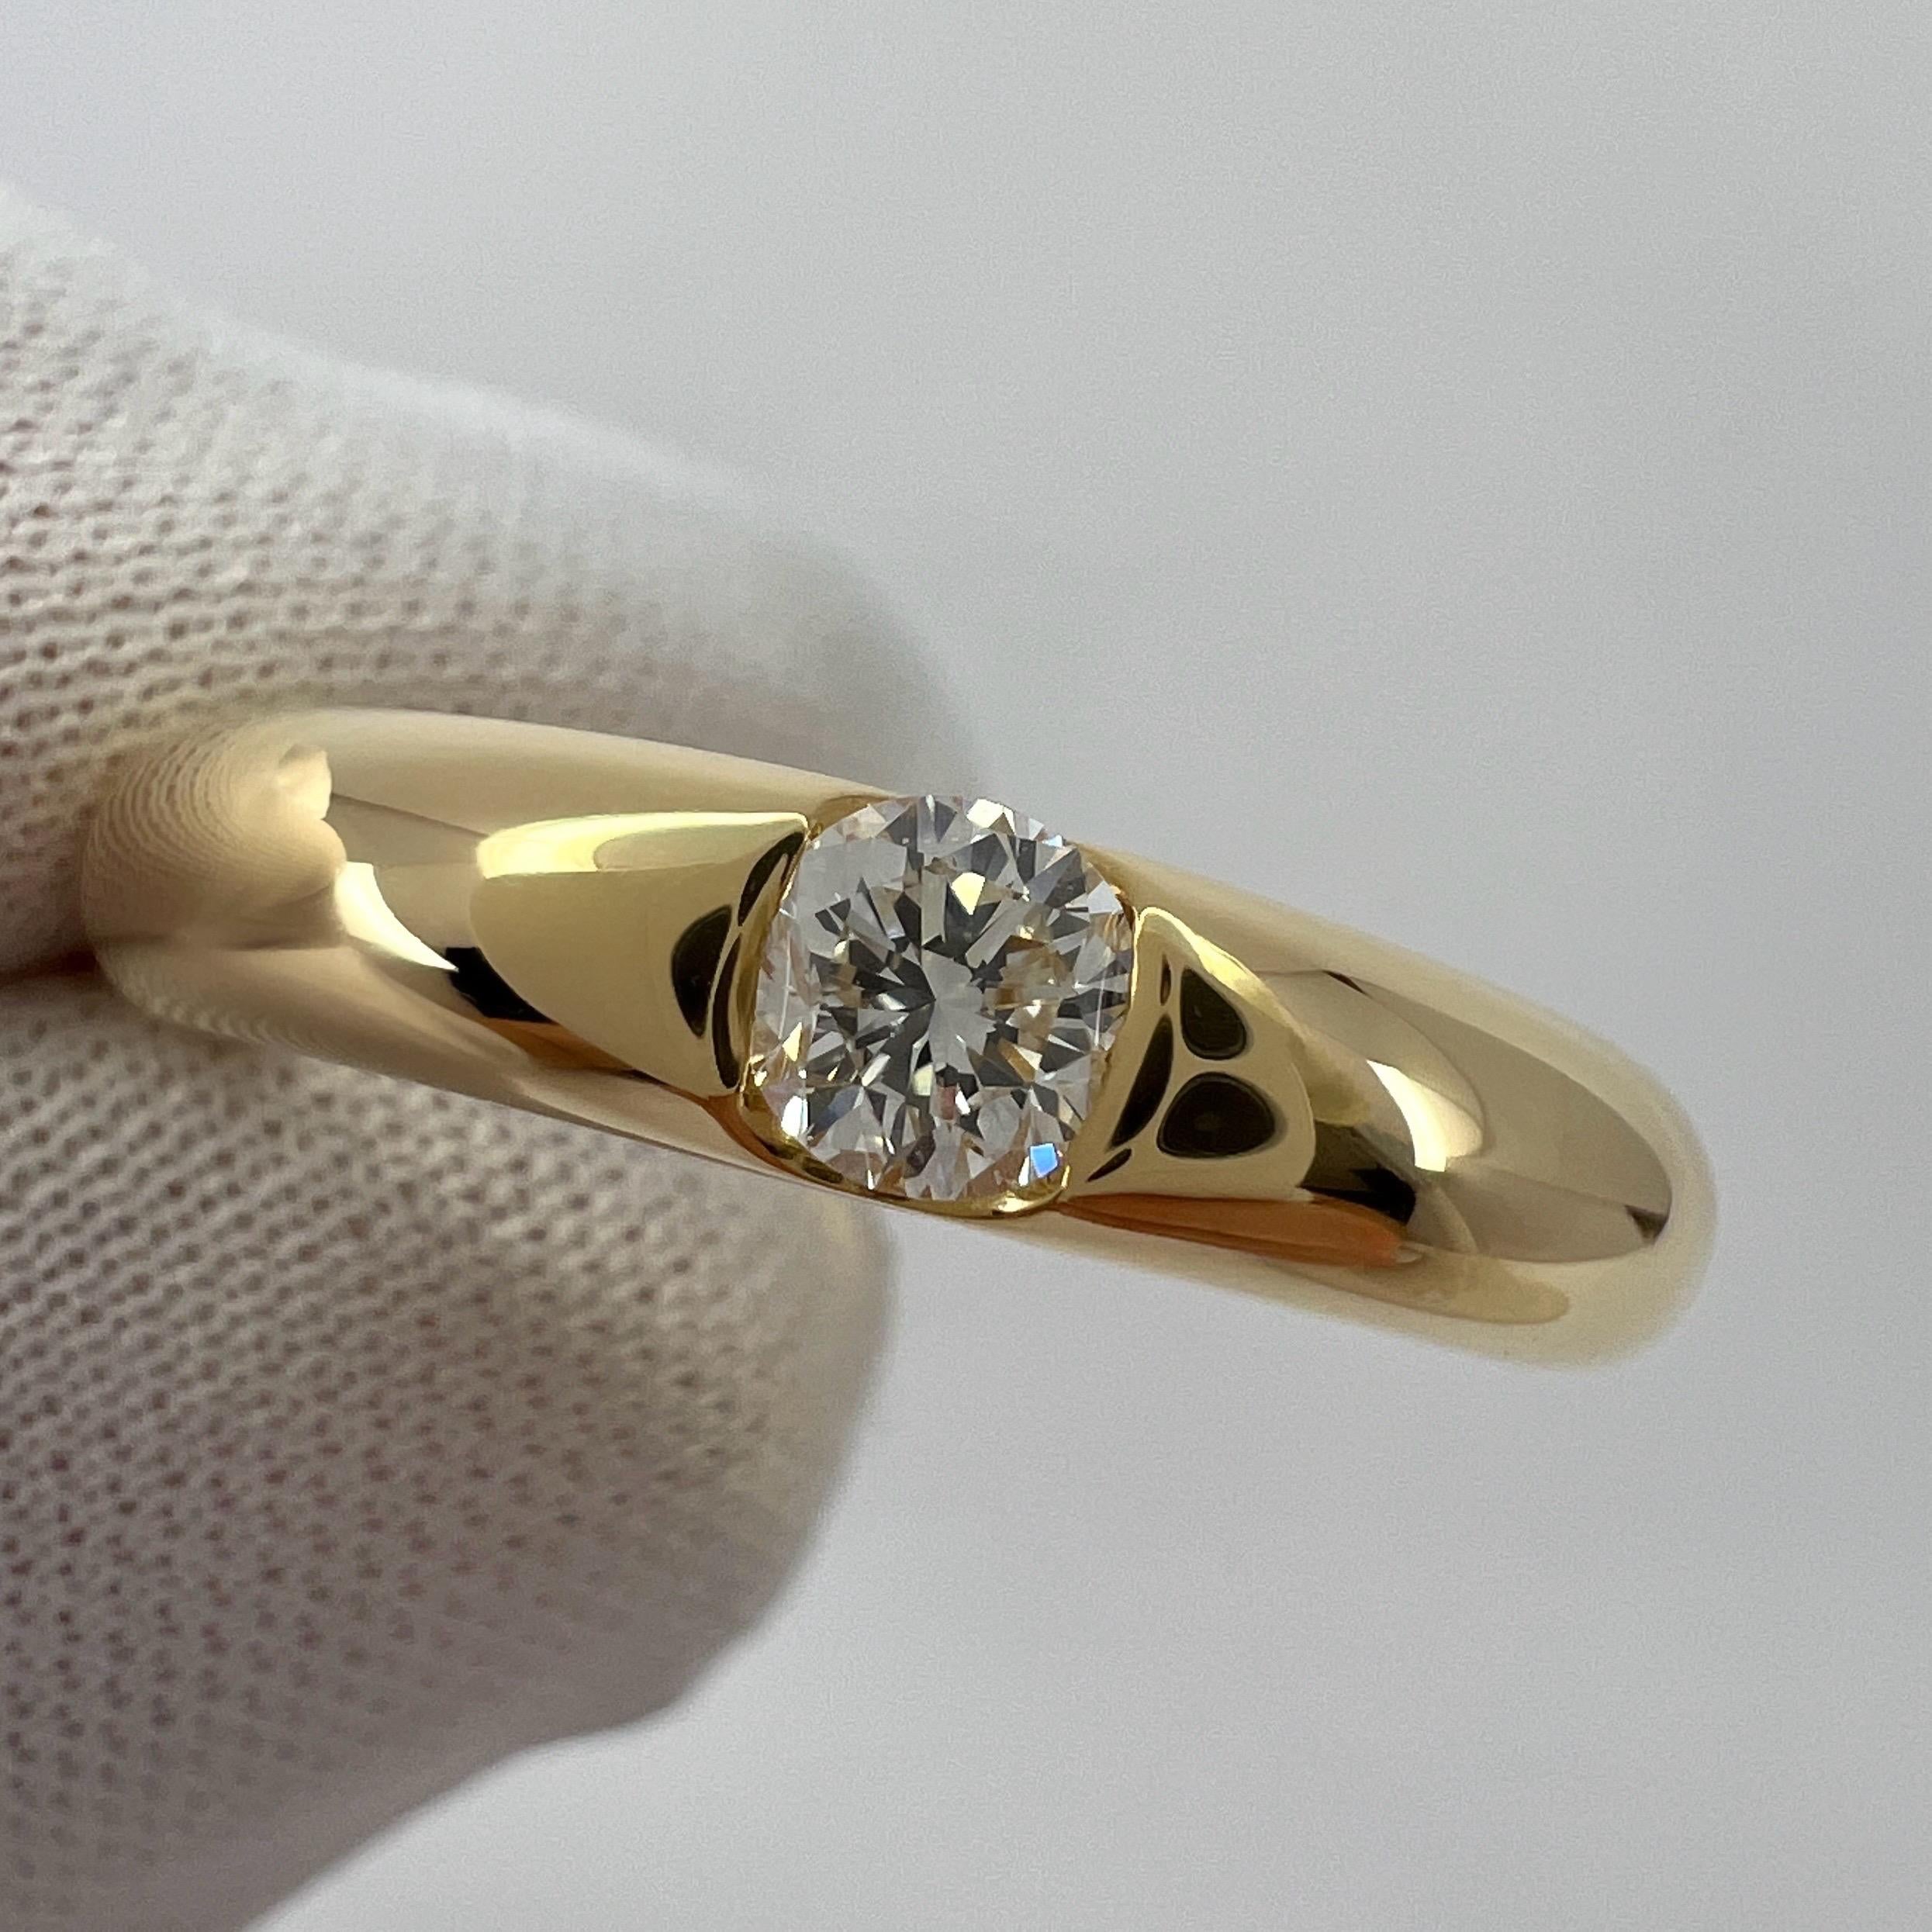 Vintage Cartier Round Diamond Ellipse 18k Yellow Gold Solitaire Band Ring US5 49 4